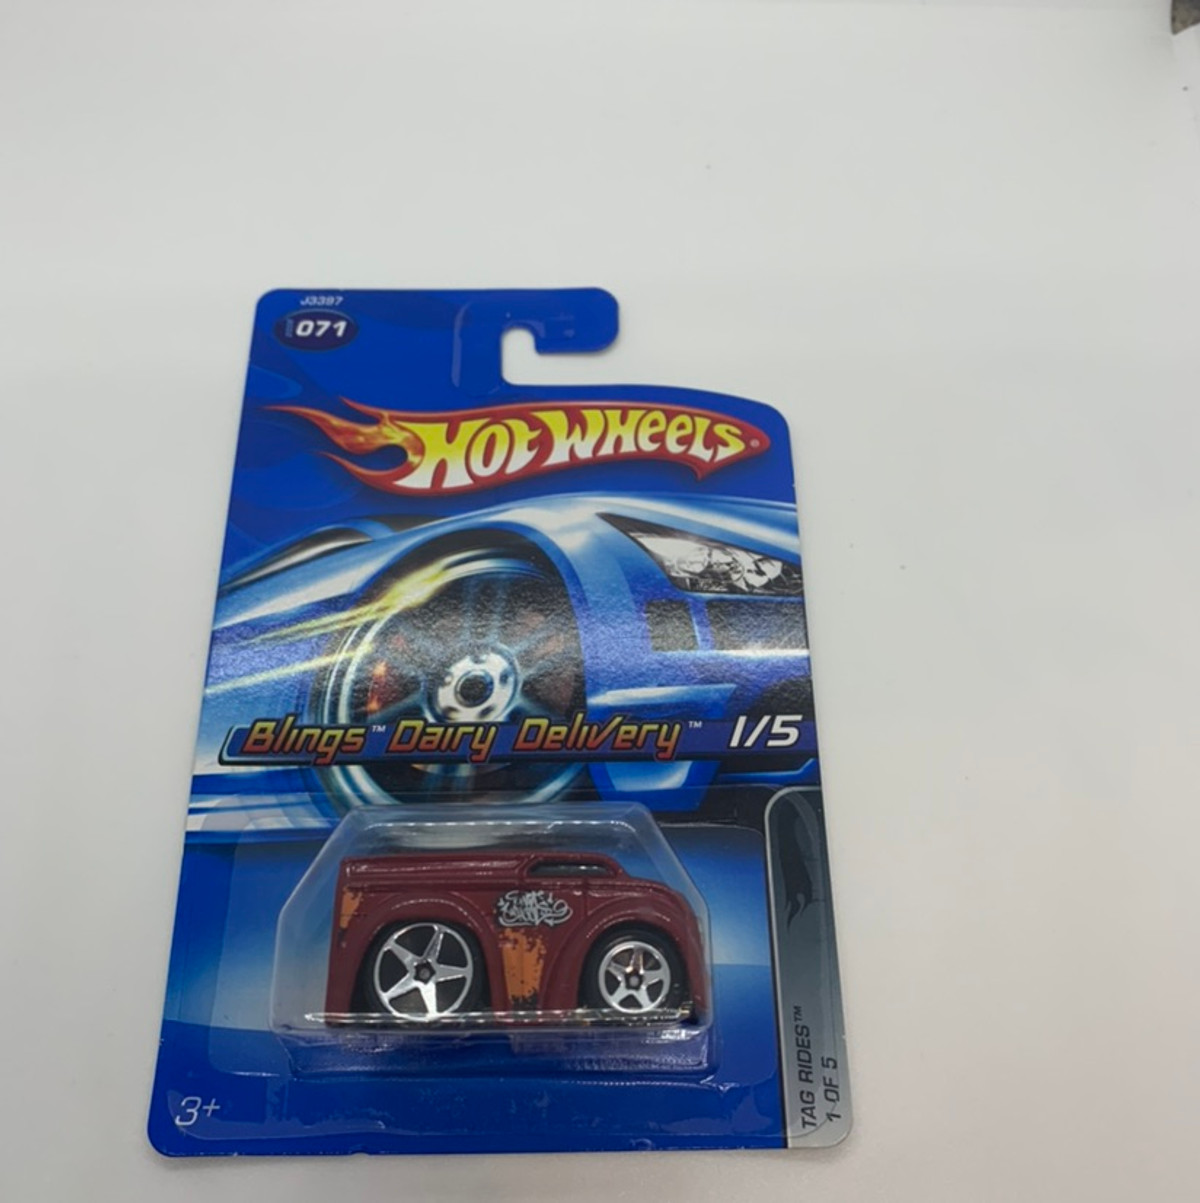 2006 Hot wheels Tag Rides Blings Dairy Delivery 